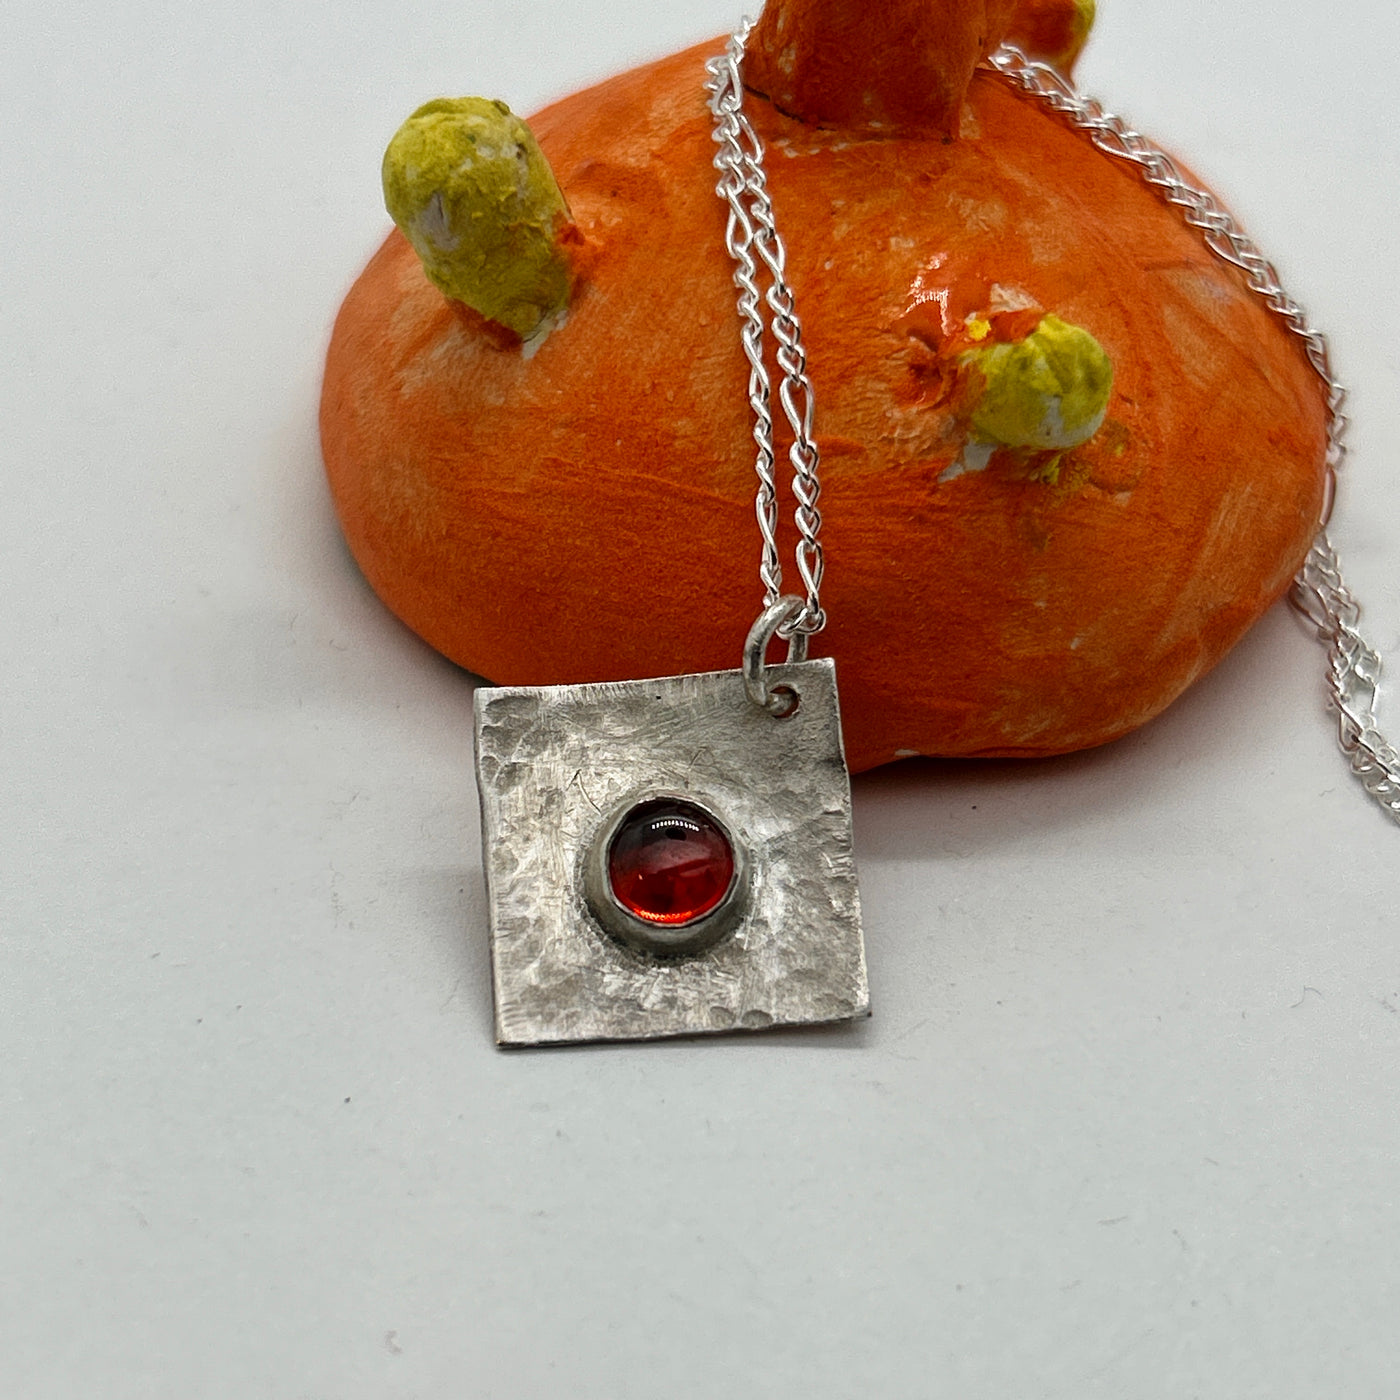 Square hammered 1.5 mm silver pendant with garnet cabochon on silver chain